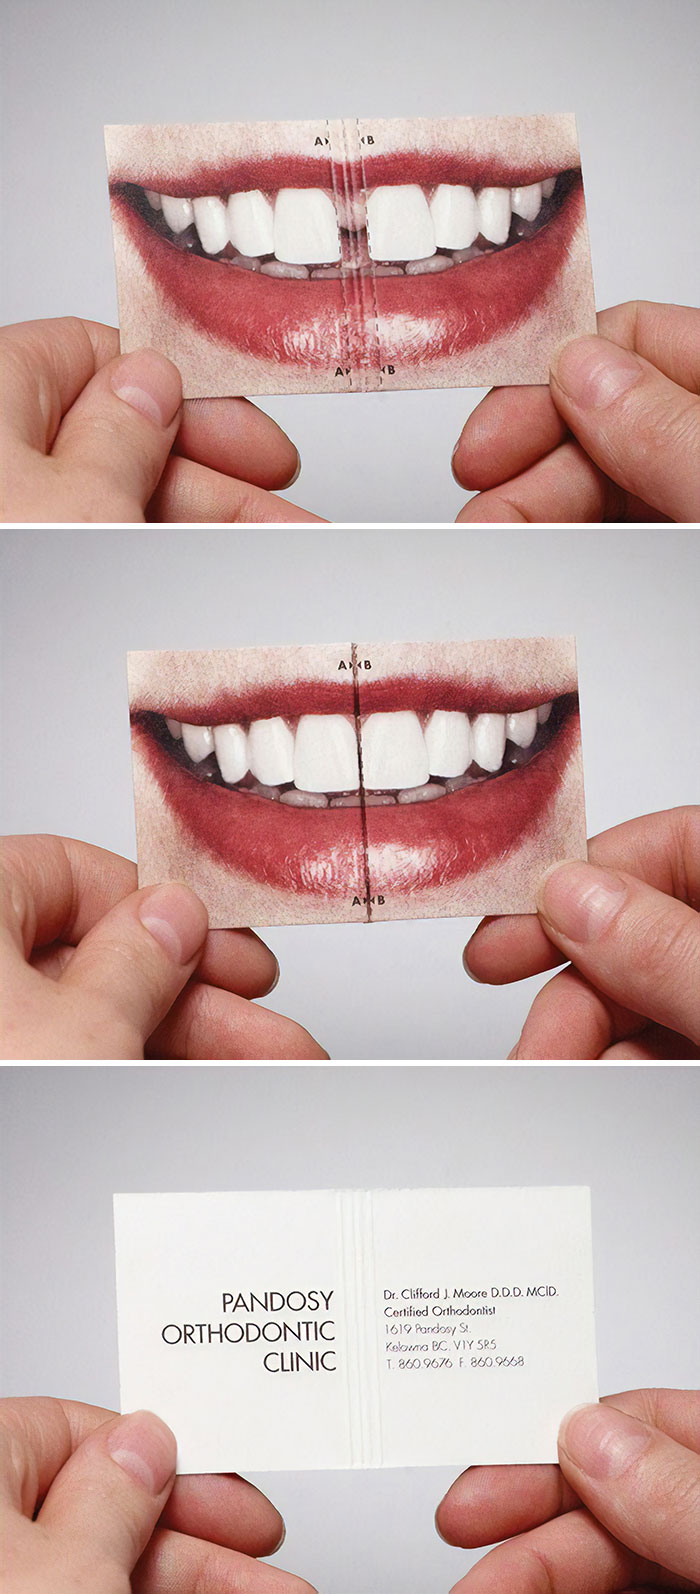 This Creative Business Card Was Done For An Orthodontist. When The Card Is Folded Together, The Gap In The Teeth Disappears